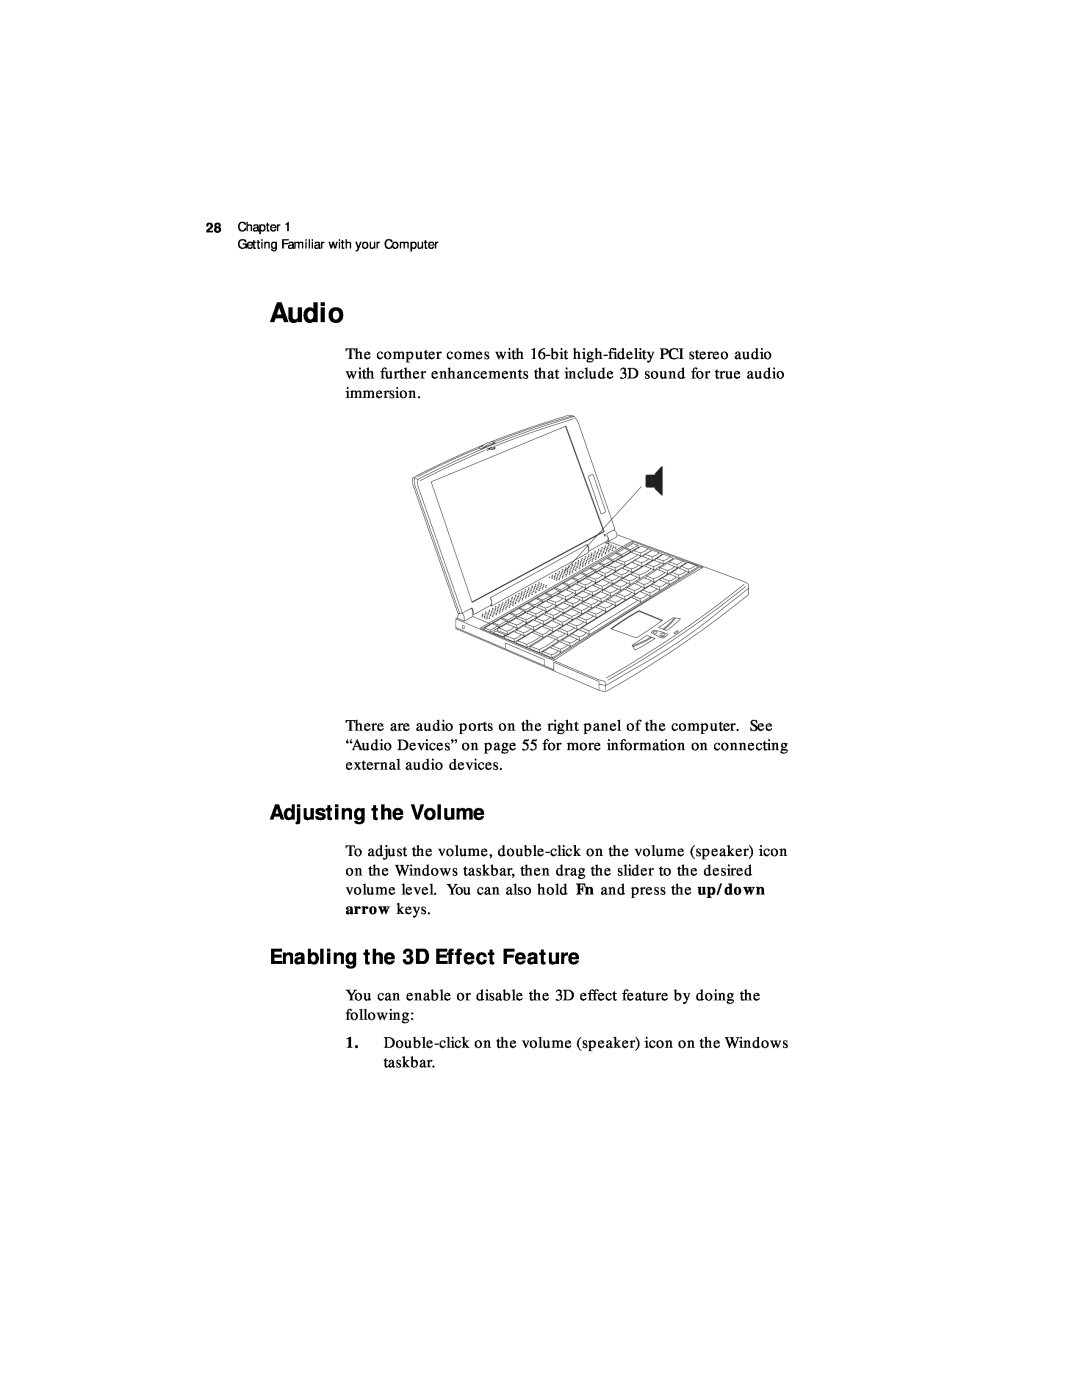 Acer 330 Series manual Audio, Adjusting the Volume, Enabling the 3D Effect Feature 